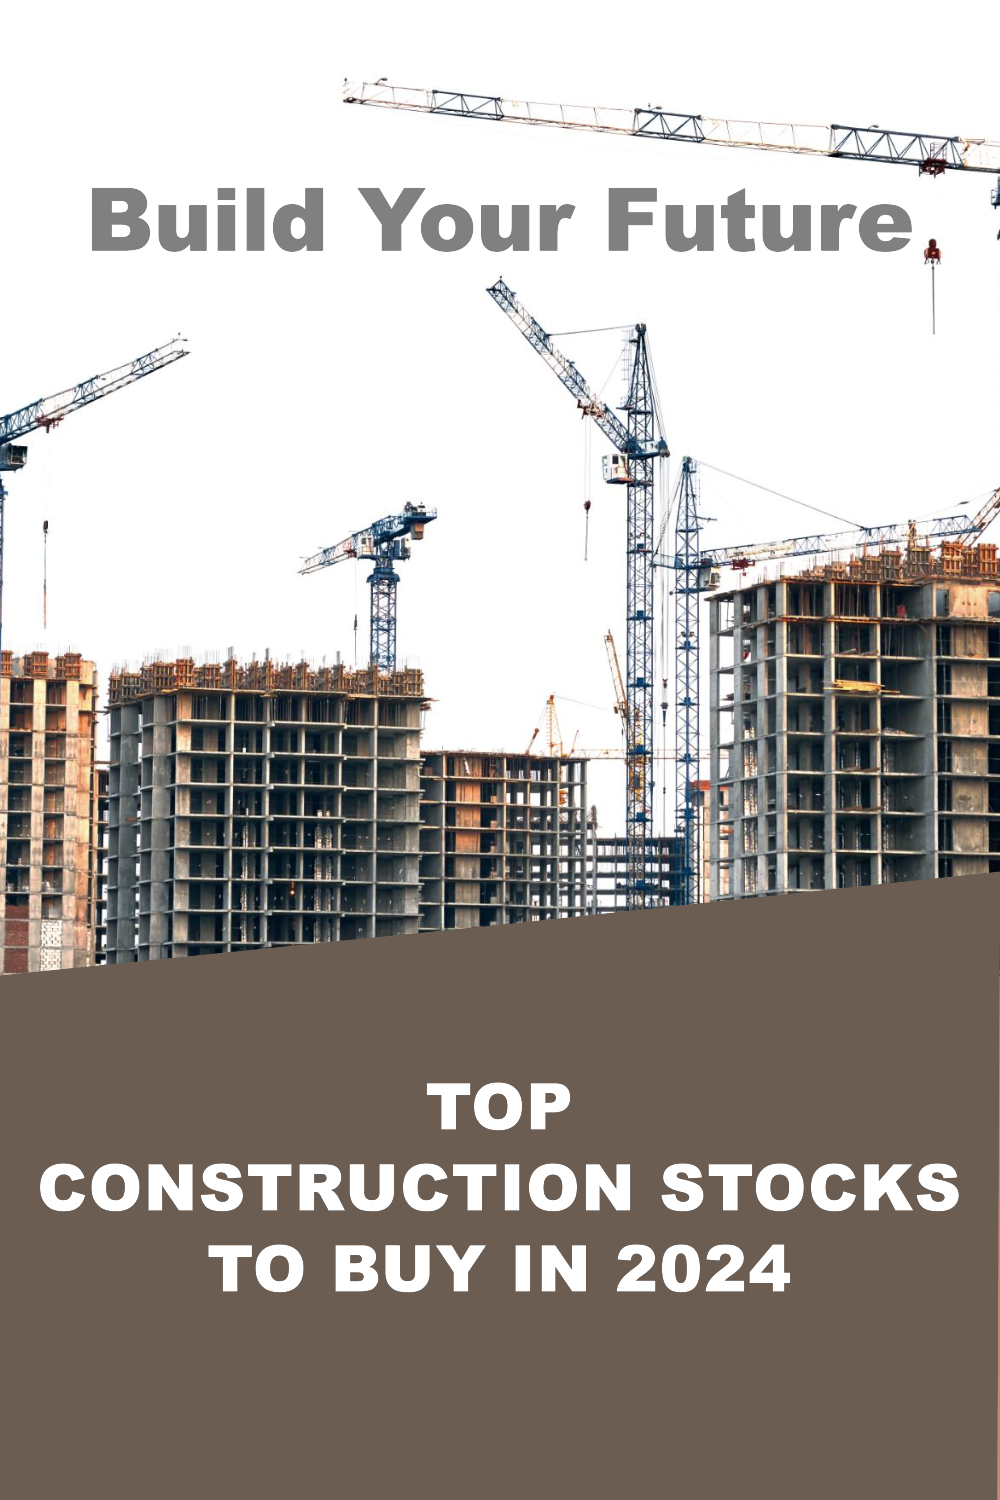 Build your future: Top construction stocks to buy in 2024